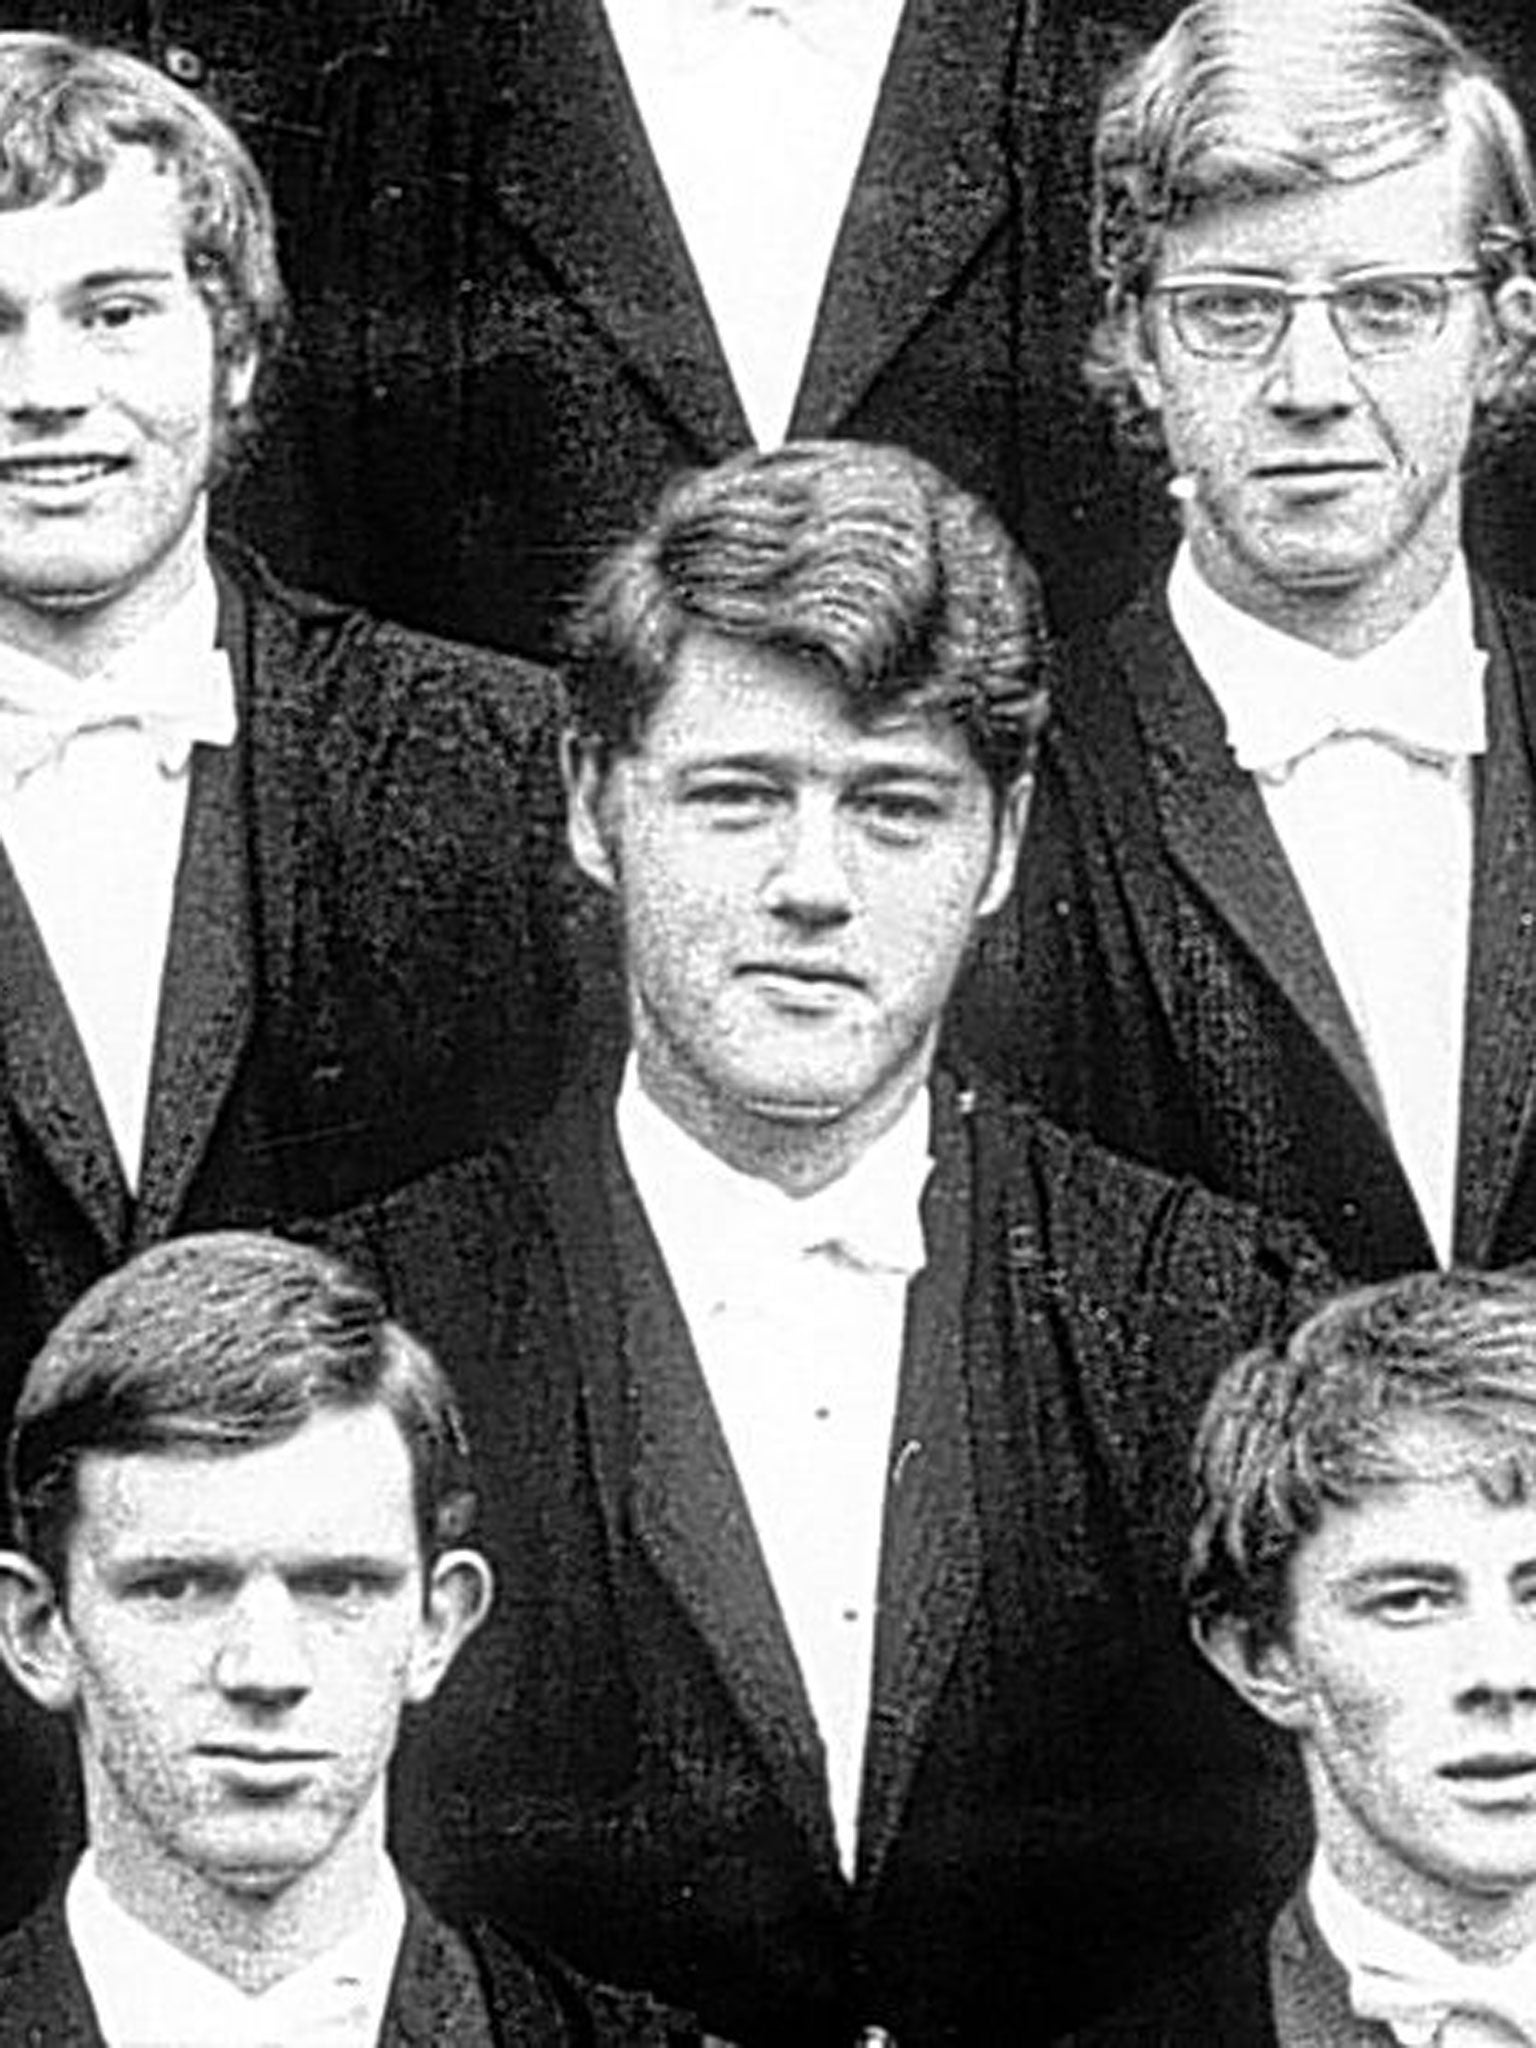 View to a Bill: Clinton during his year at Oxford